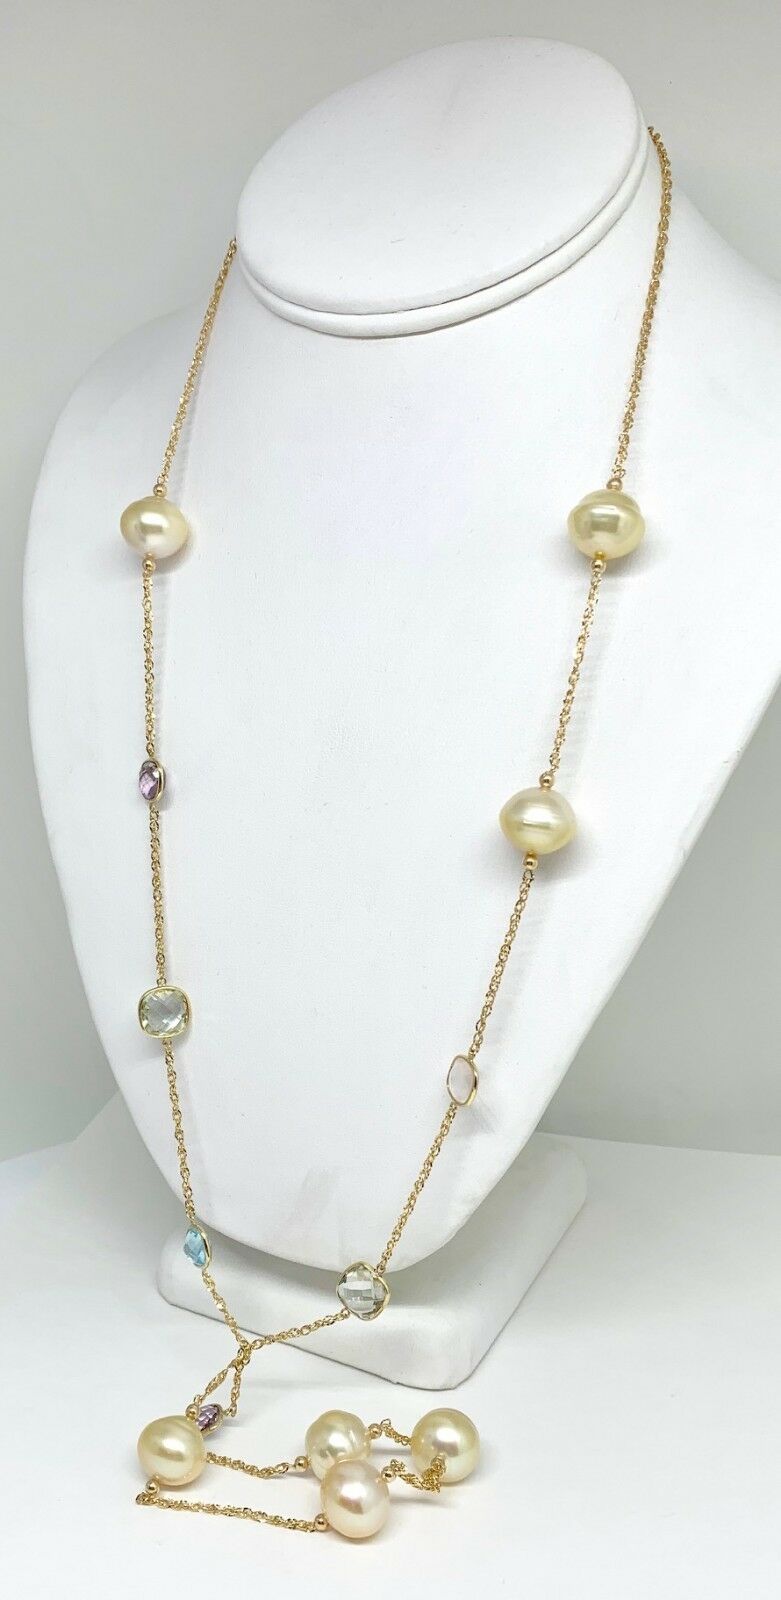 South Sea Pearl Quartz Necklace 14.30 mm 14k Gold Certified $2995 822110 - Certified Estate Jewelry